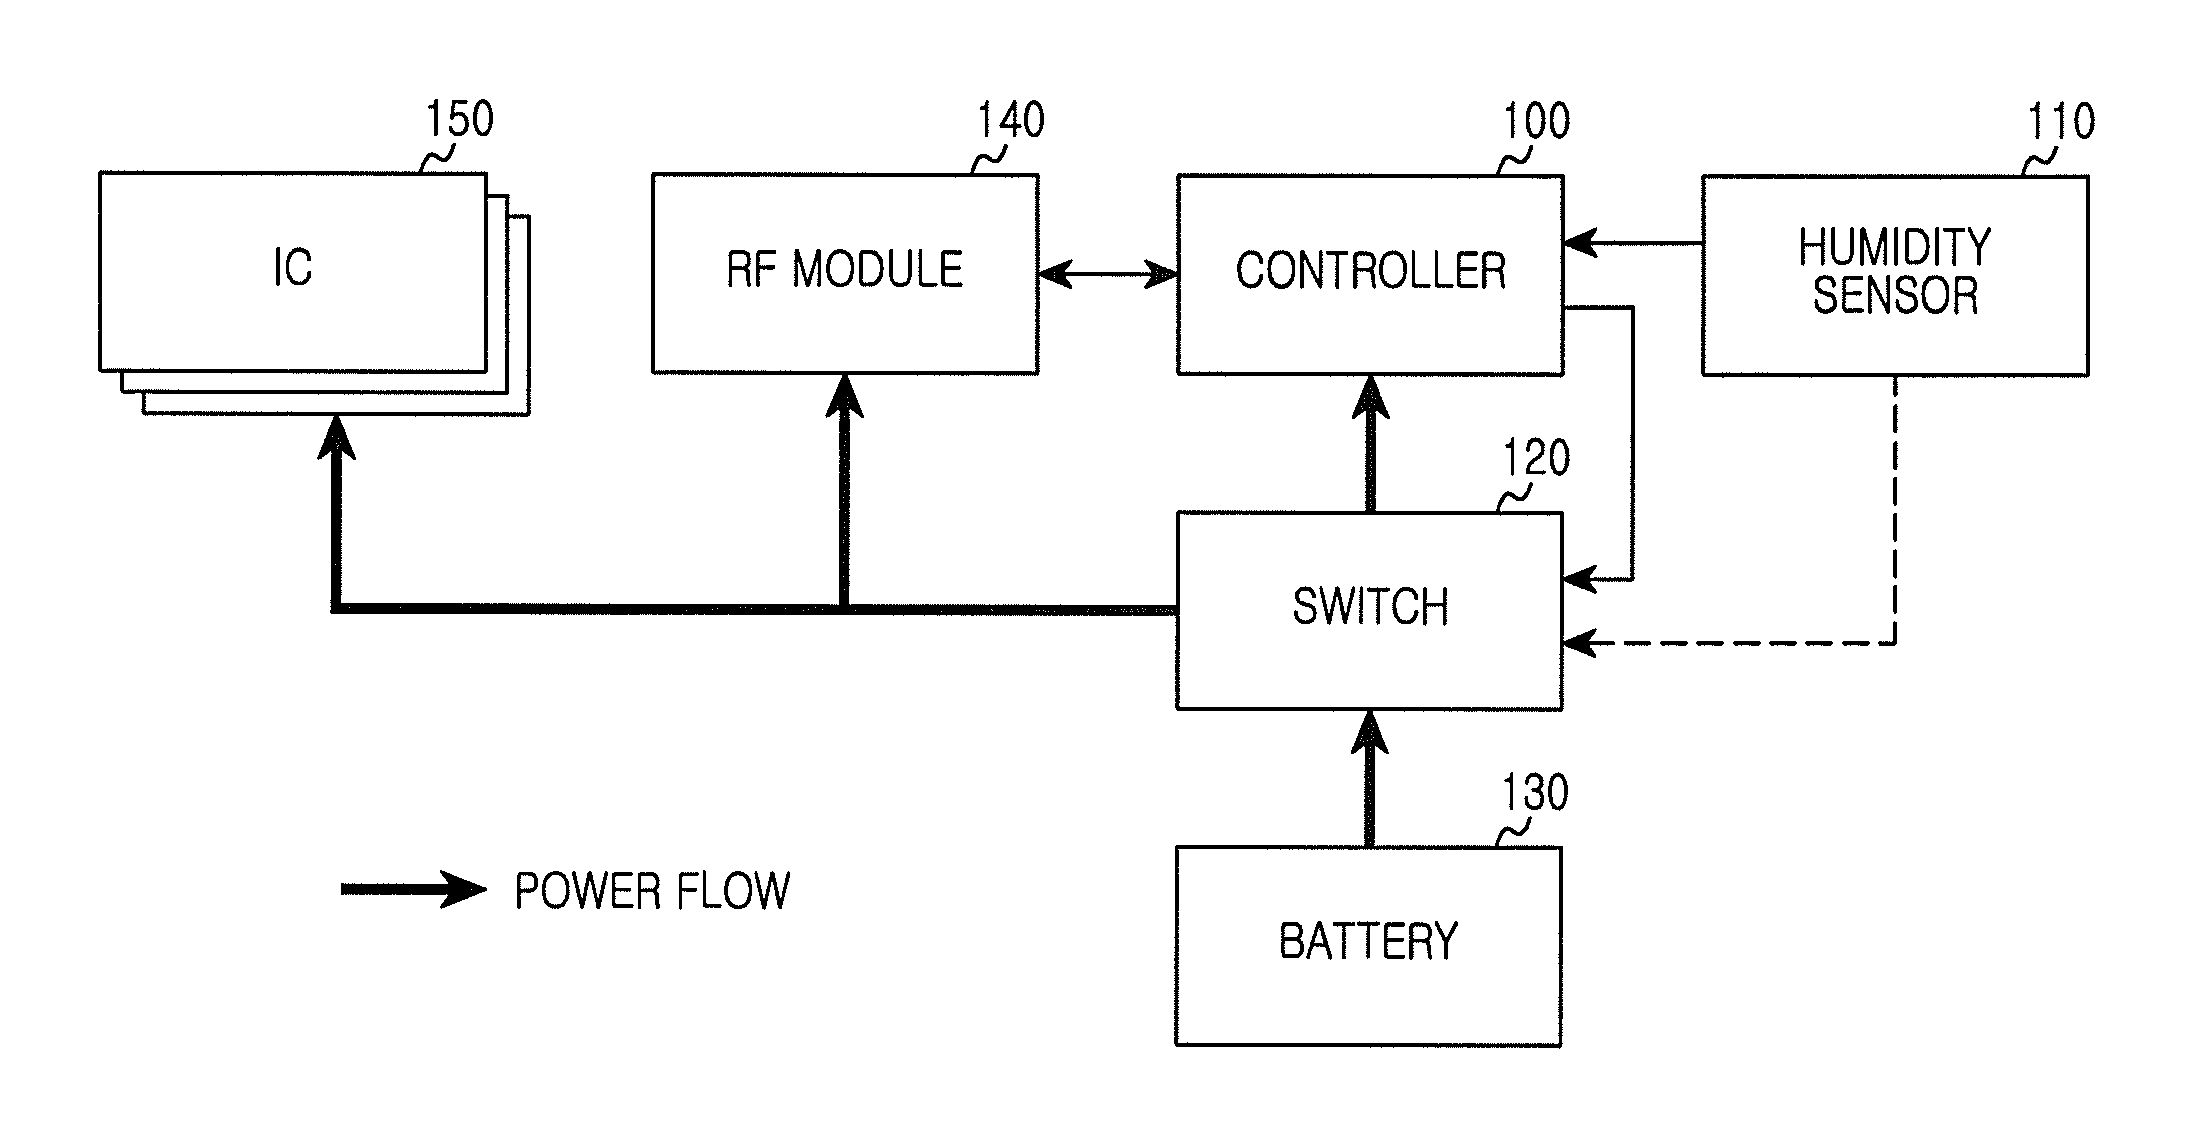 Apparatus and method for controlling power in portable terminal